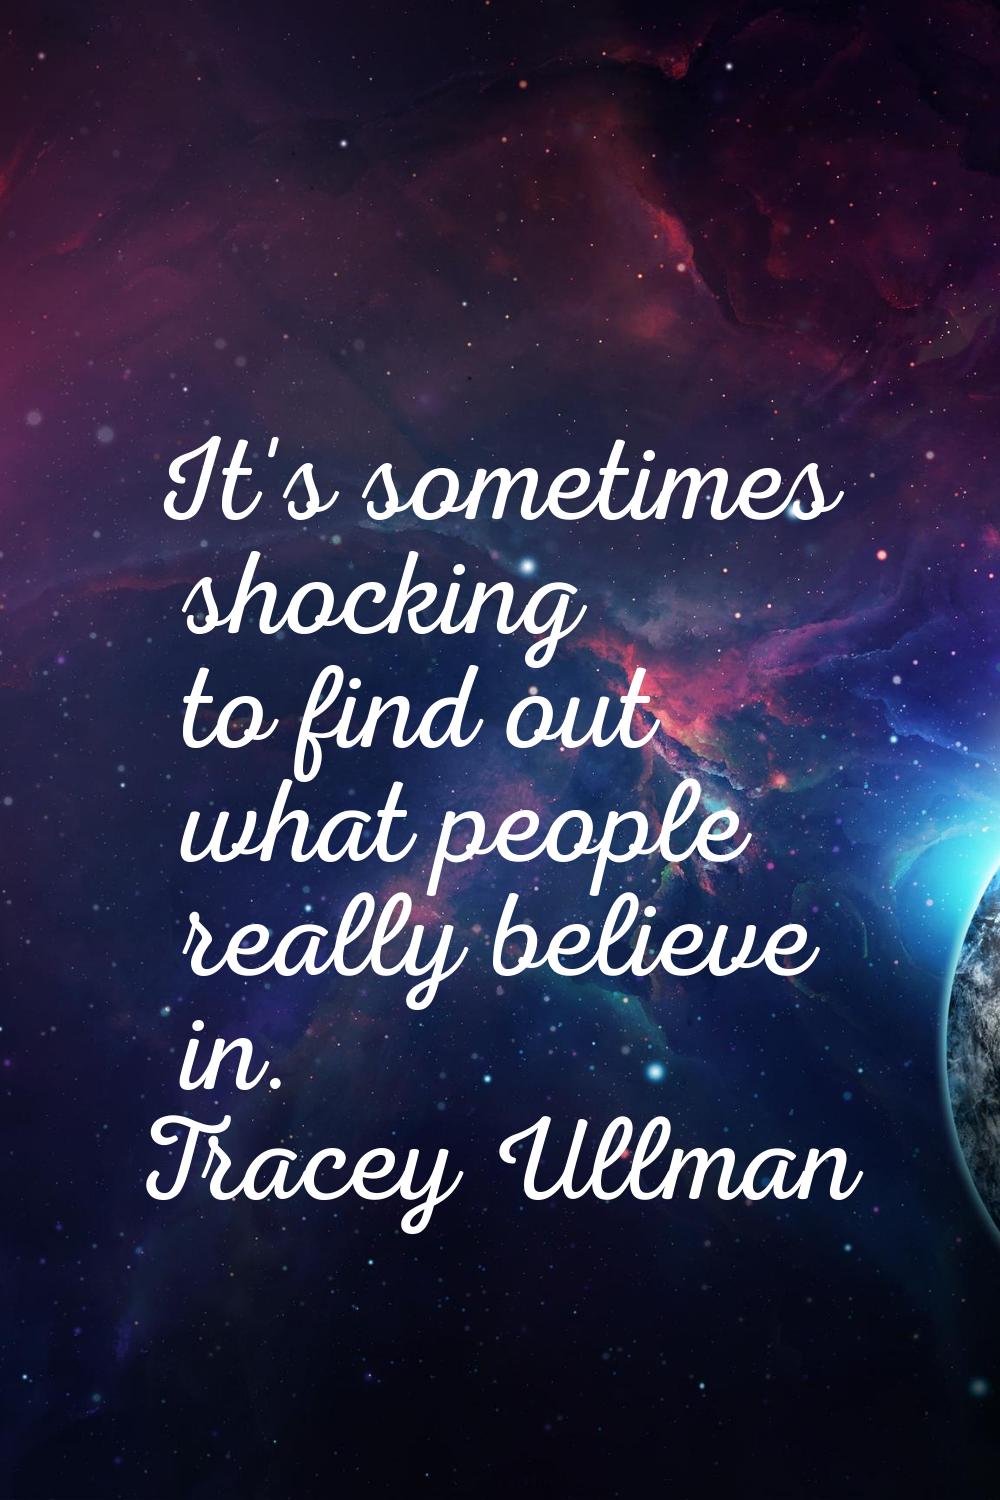 It's sometimes shocking to find out what people really believe in.